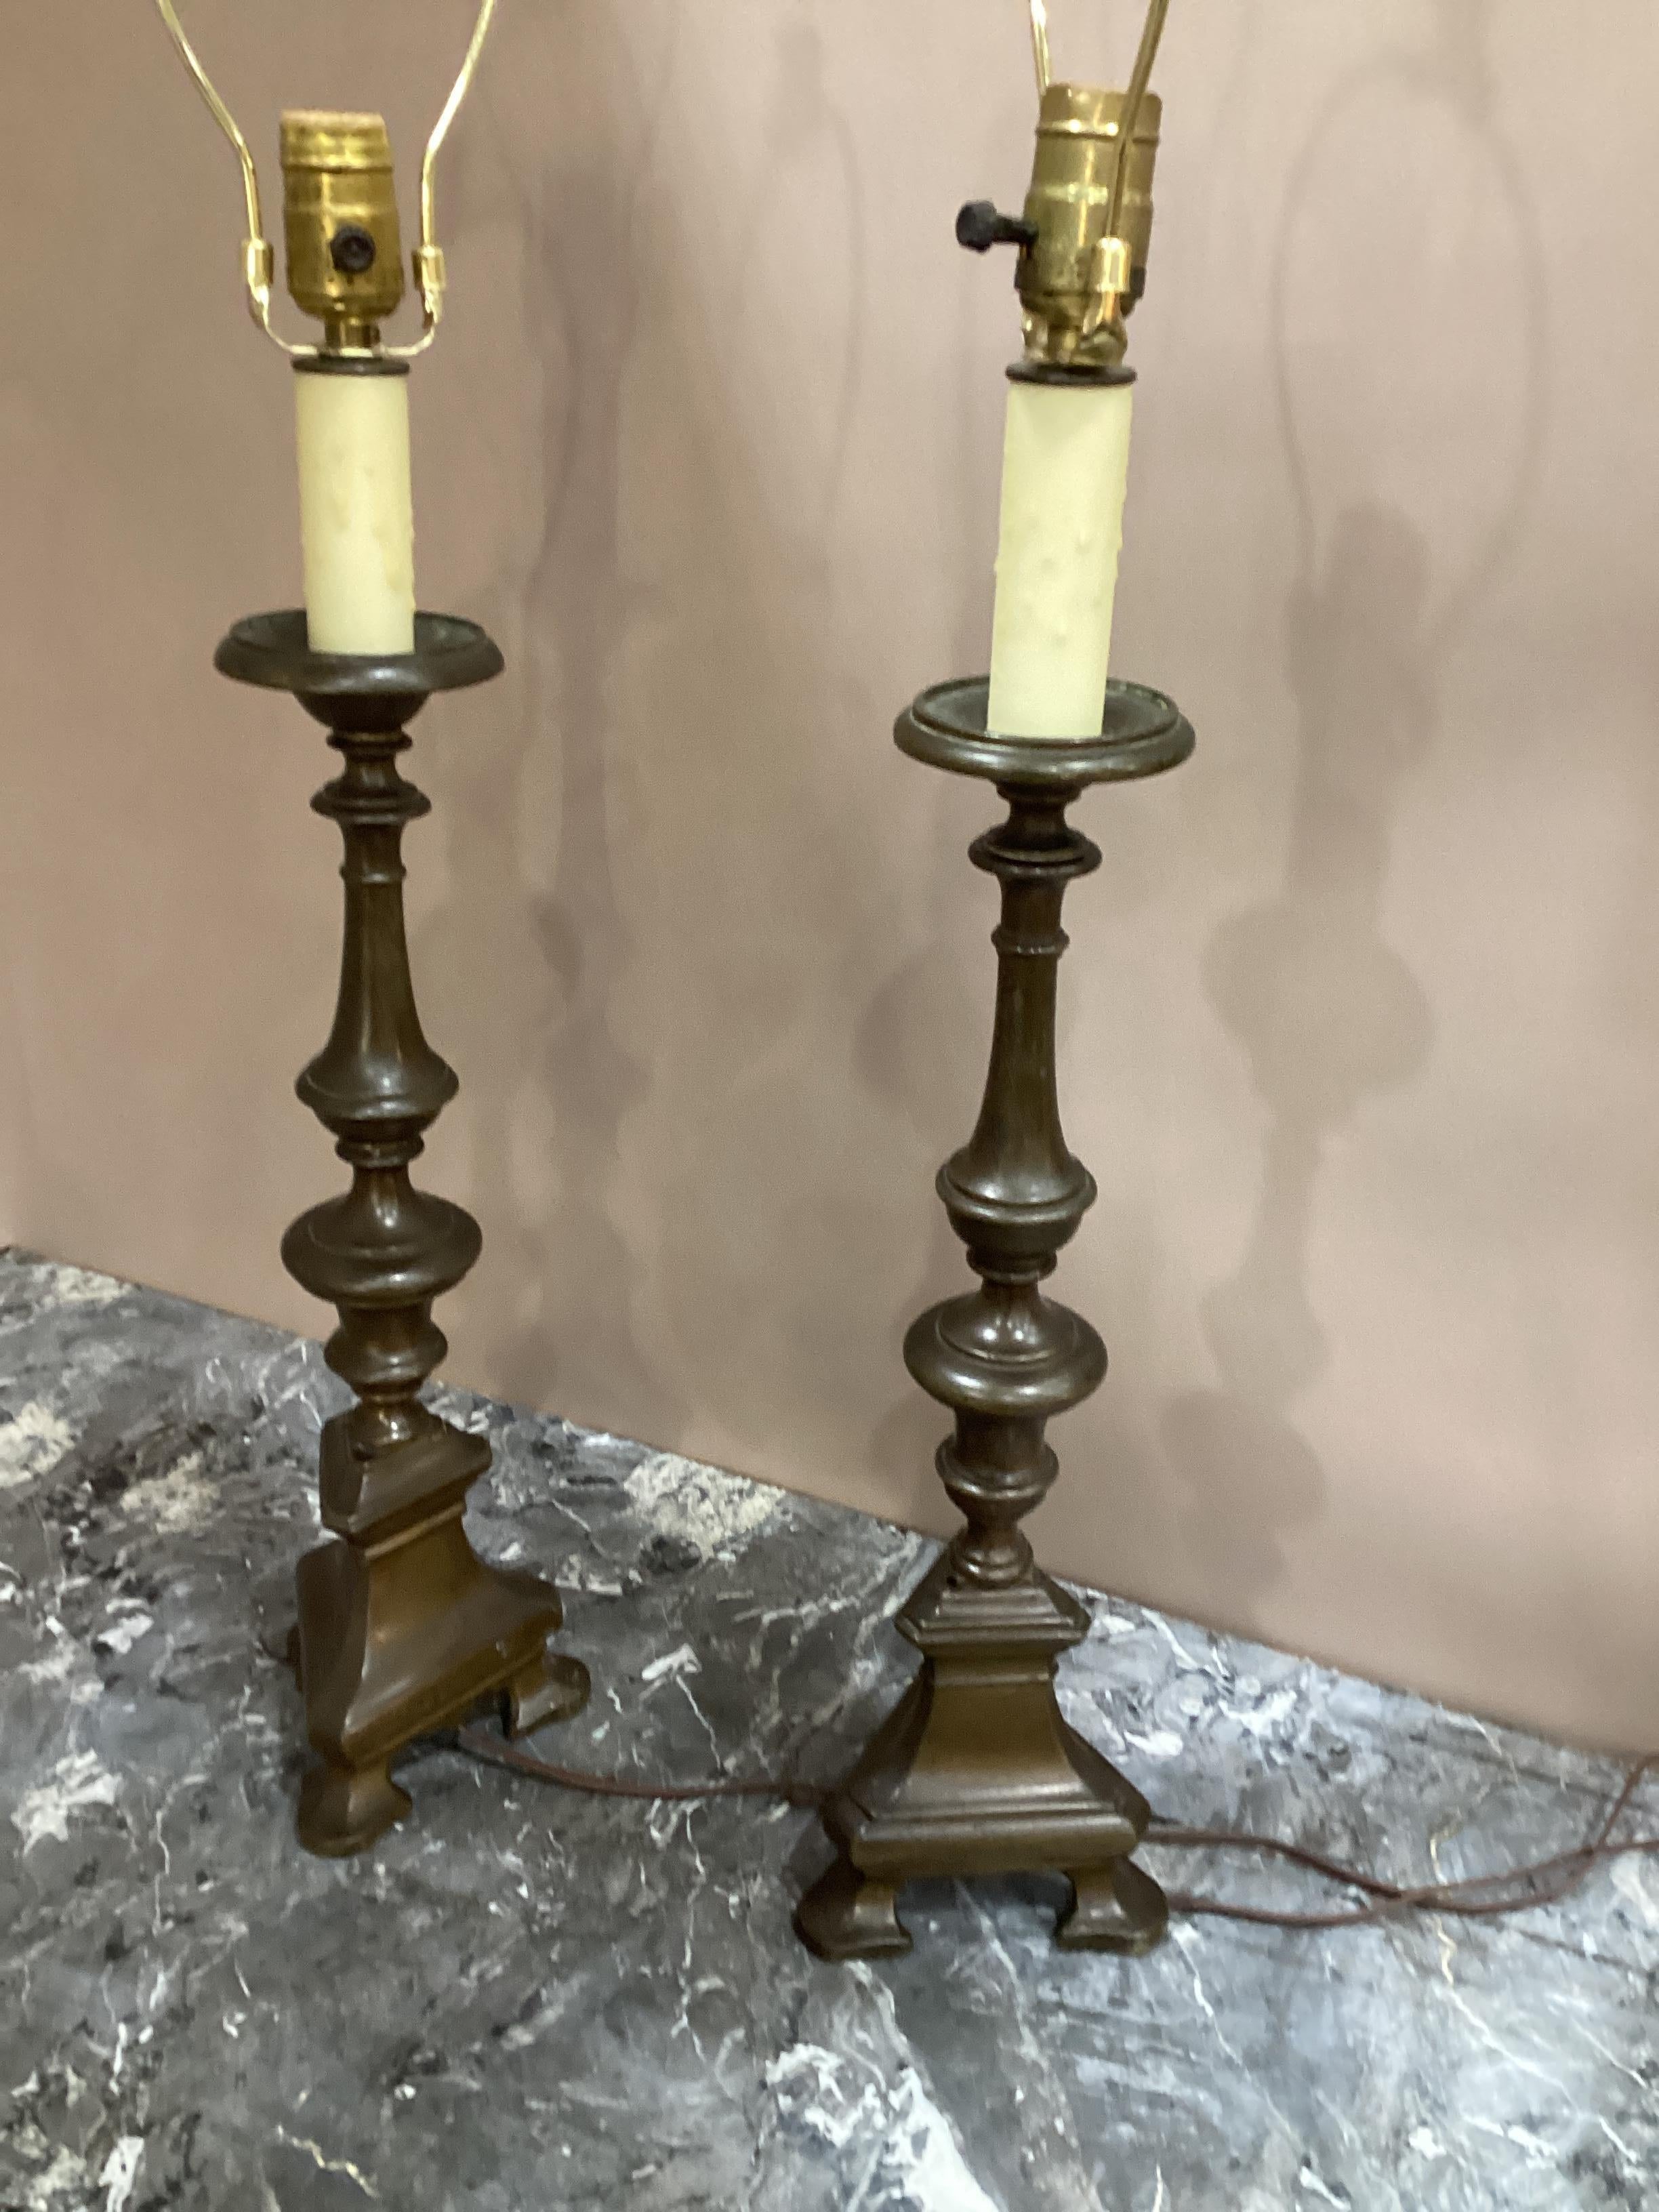 Pair of 19th Century Italian Baroque Style Bronze Candlesticks converted into lamps. Measures 21” to bottom of harp and 30” overall. Wired and in good working condition.